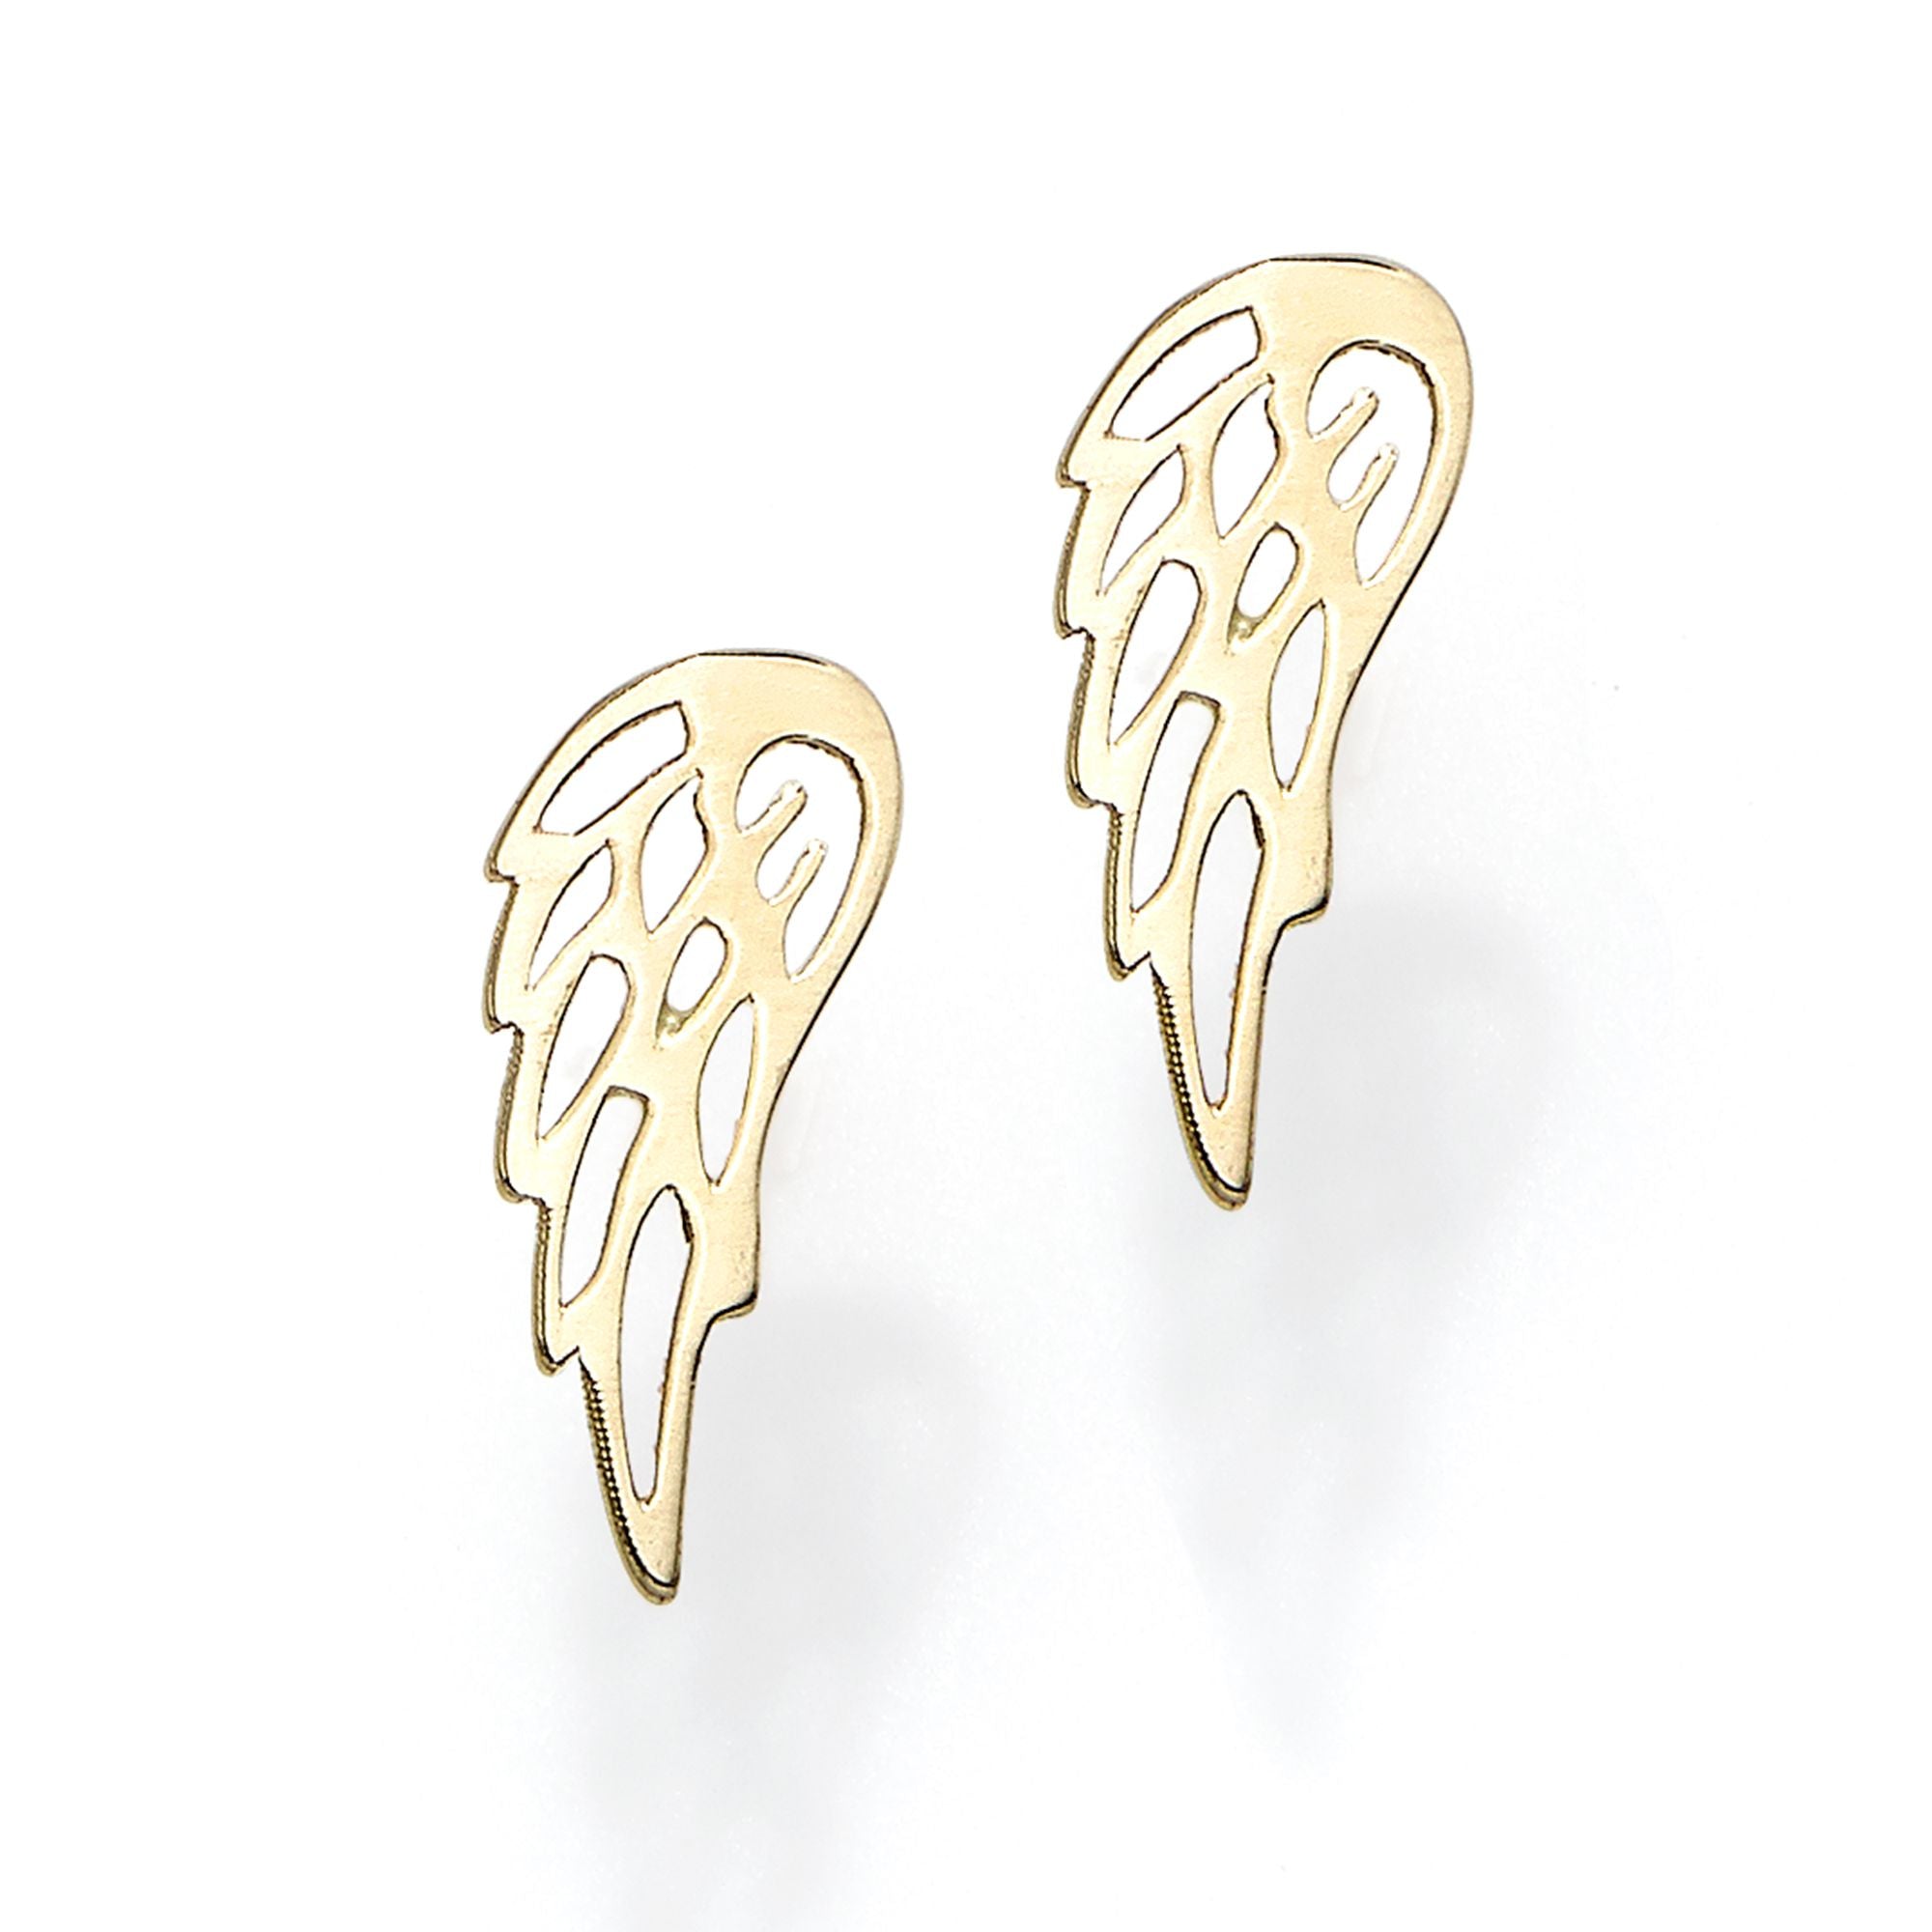 Minimalist Solid Gold Guardian Angel Wing Post Earrings with Push Back Clasp - wingroupjewelry